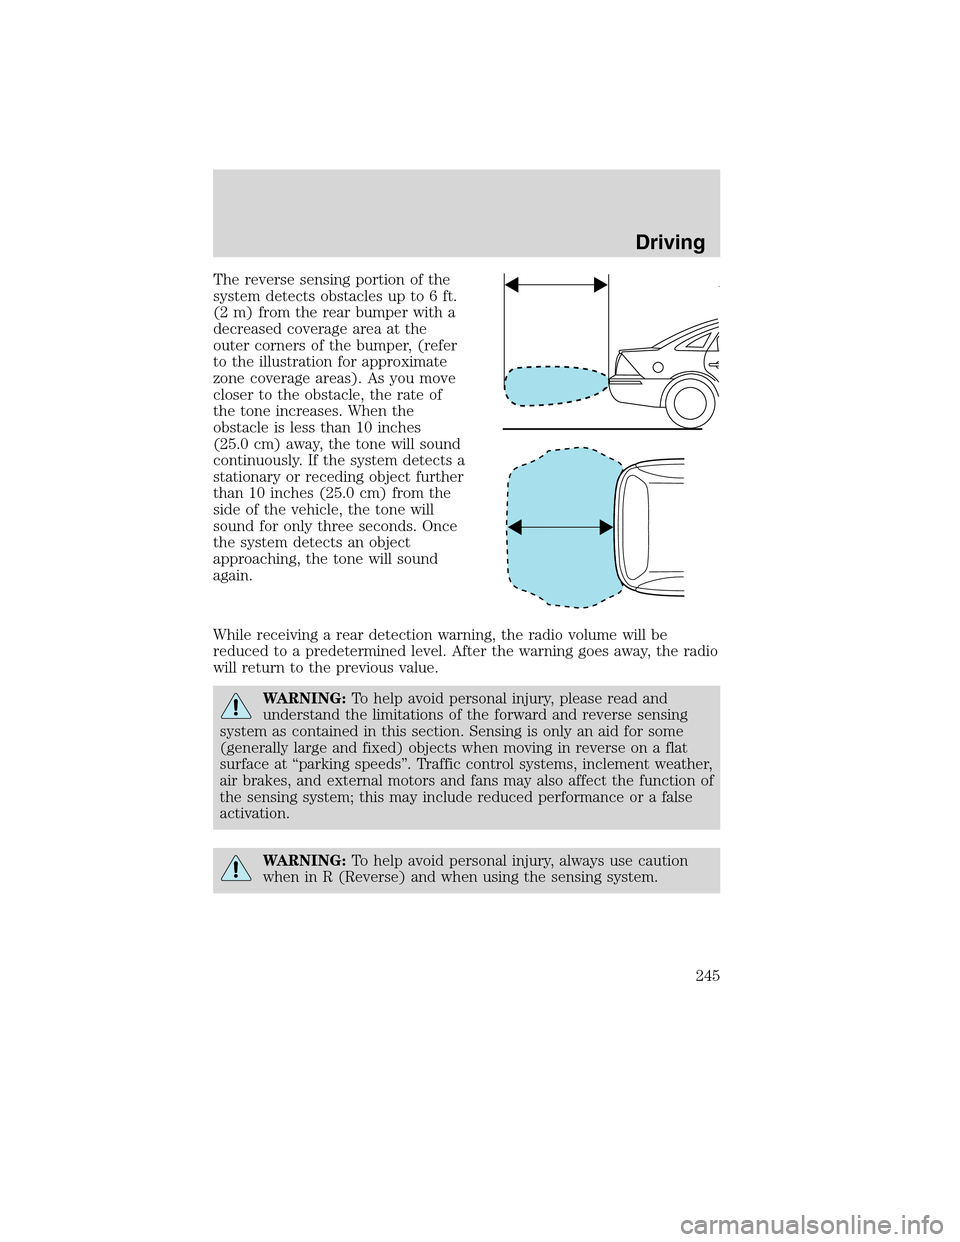 LINCOLN MKS 2010 Repair Manual The reverse sensing portion of the
system detects obstacles up to 6 ft.
(2 m) from the rear bumper with a
decreased coverage area at the
outer corners of the bumper, (refer
to the illustration for app